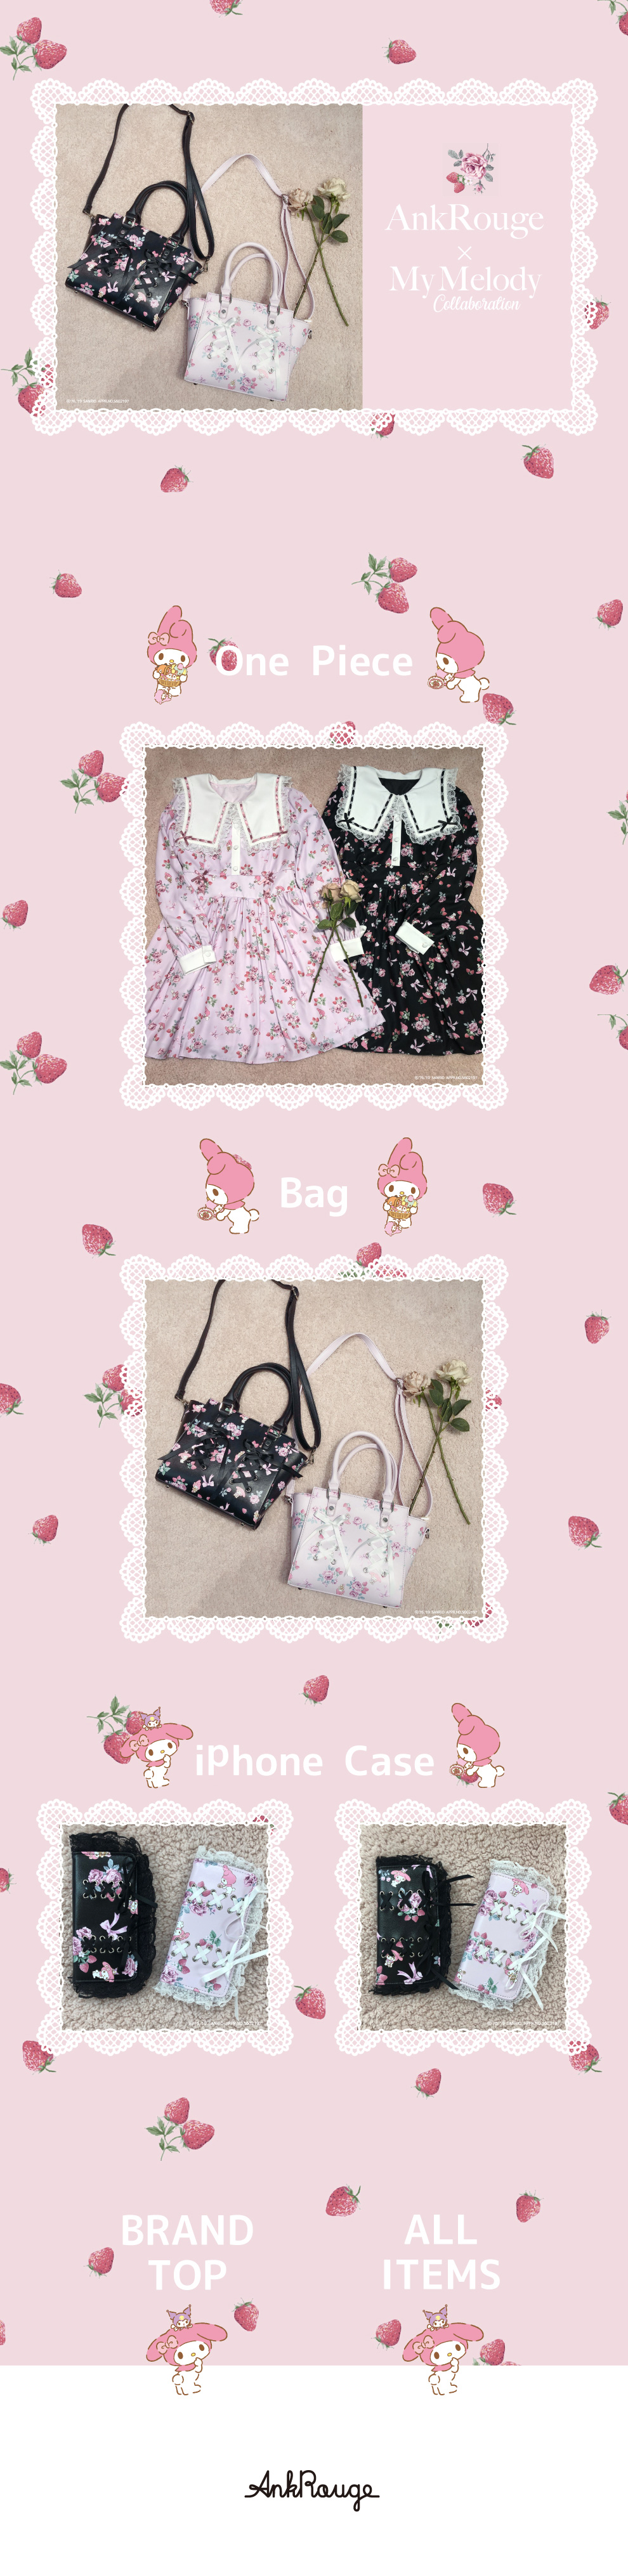 Ank Rouge×My Melody Collaboration Item